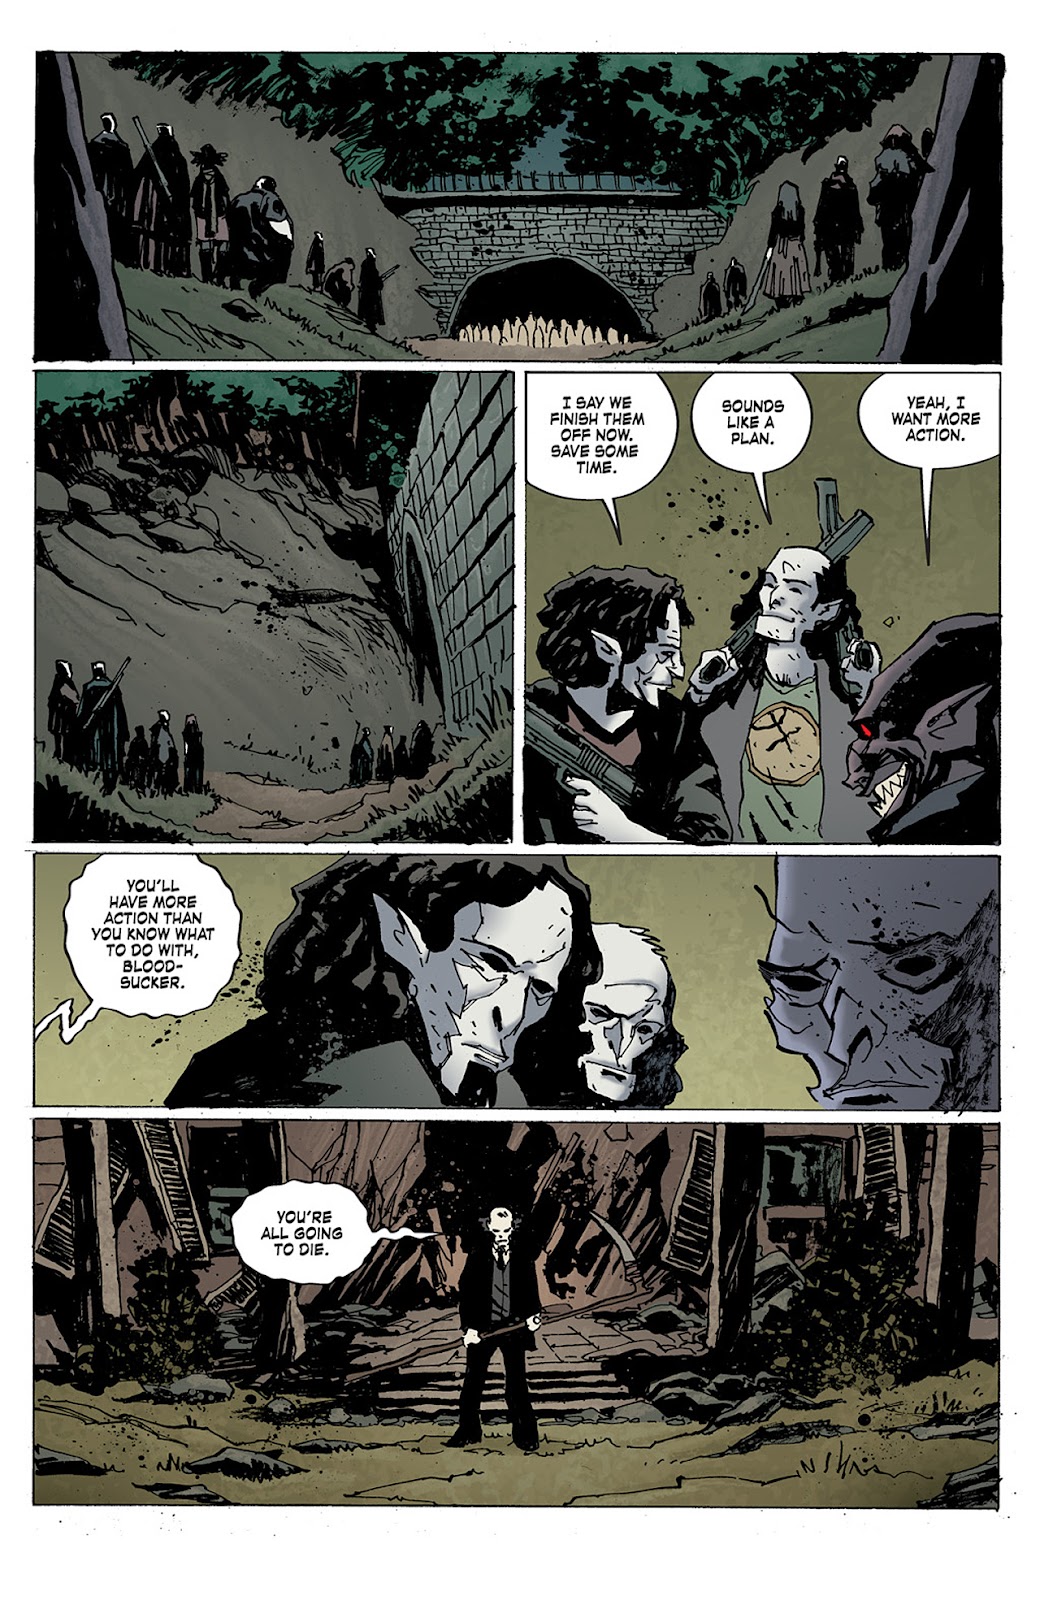 Criminal Macabre: Final Night - The 30 Days of Night Crossover issue 3 - Page 22